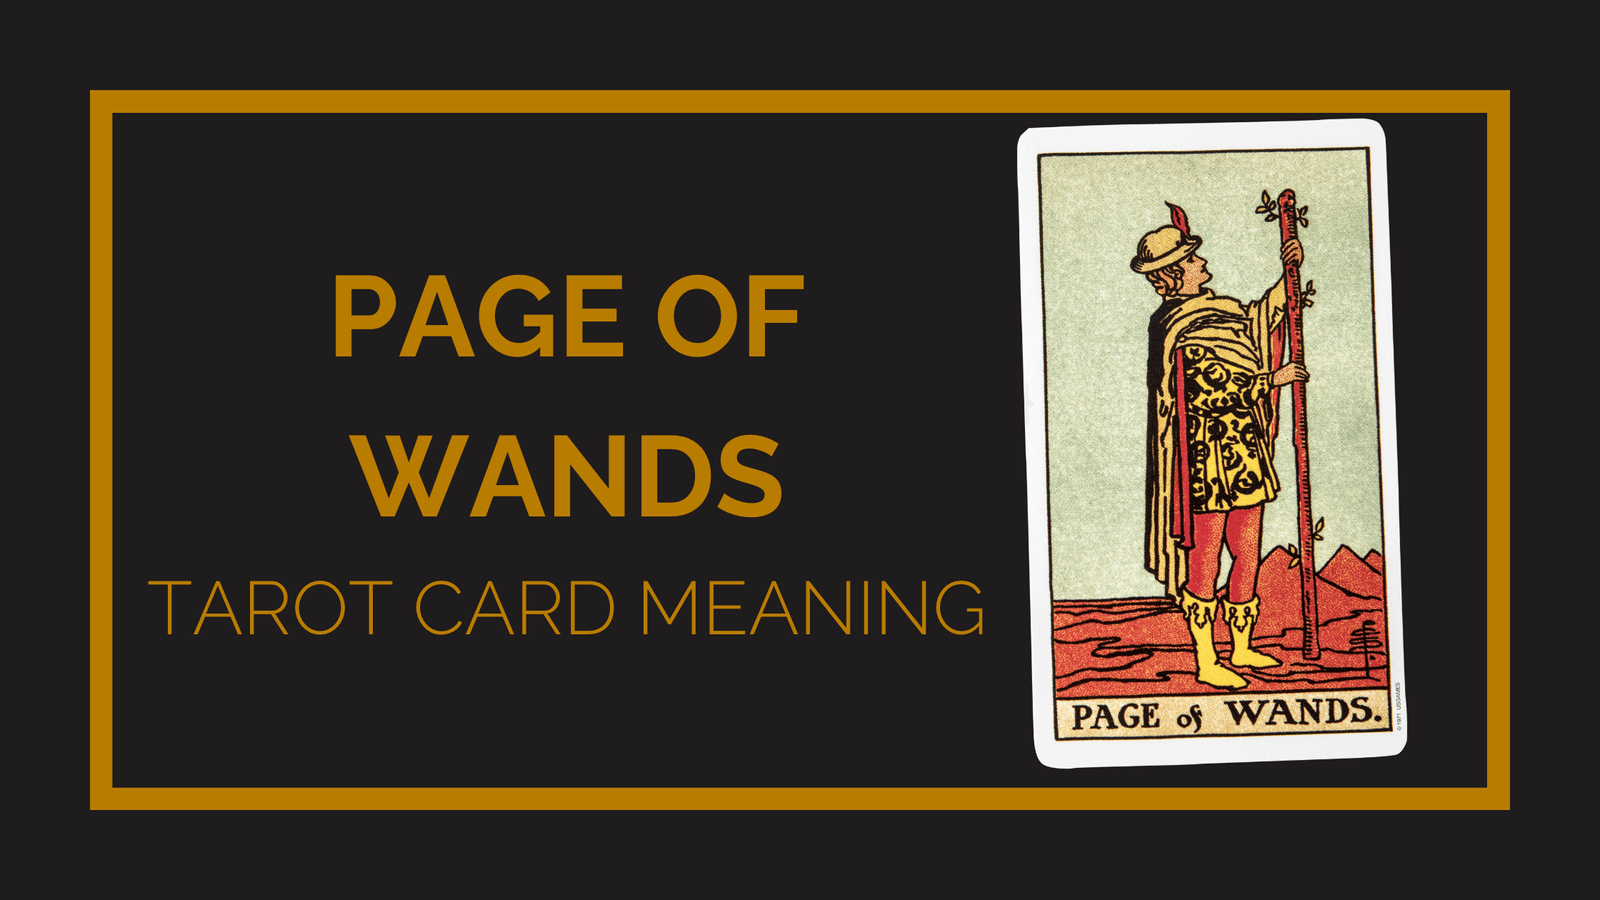 Page of wands tarot card meaning | tarot with gord